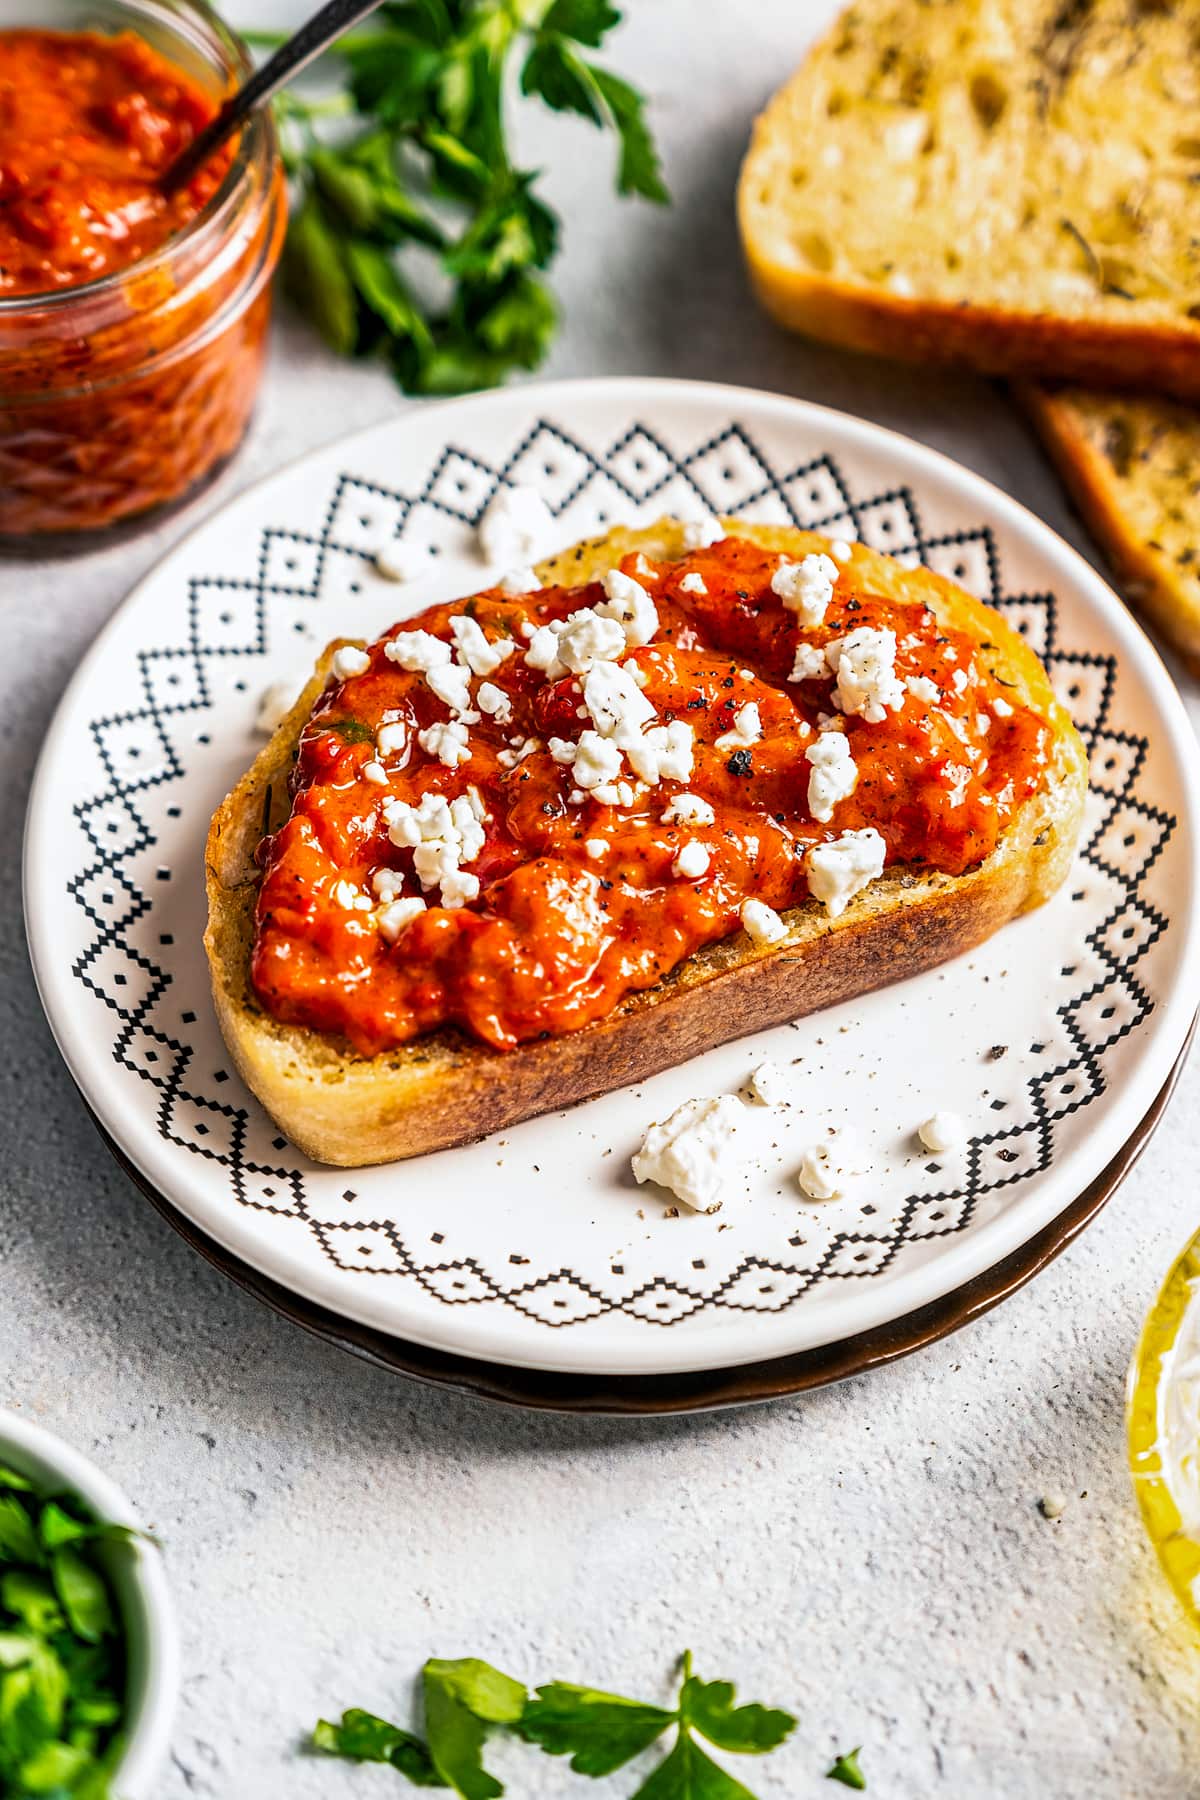 Red pepper relish spread over a piece of toasted bread, topped with crumbled feta, served on a plate, and set next to a jar of Ajvar and more toast slices.